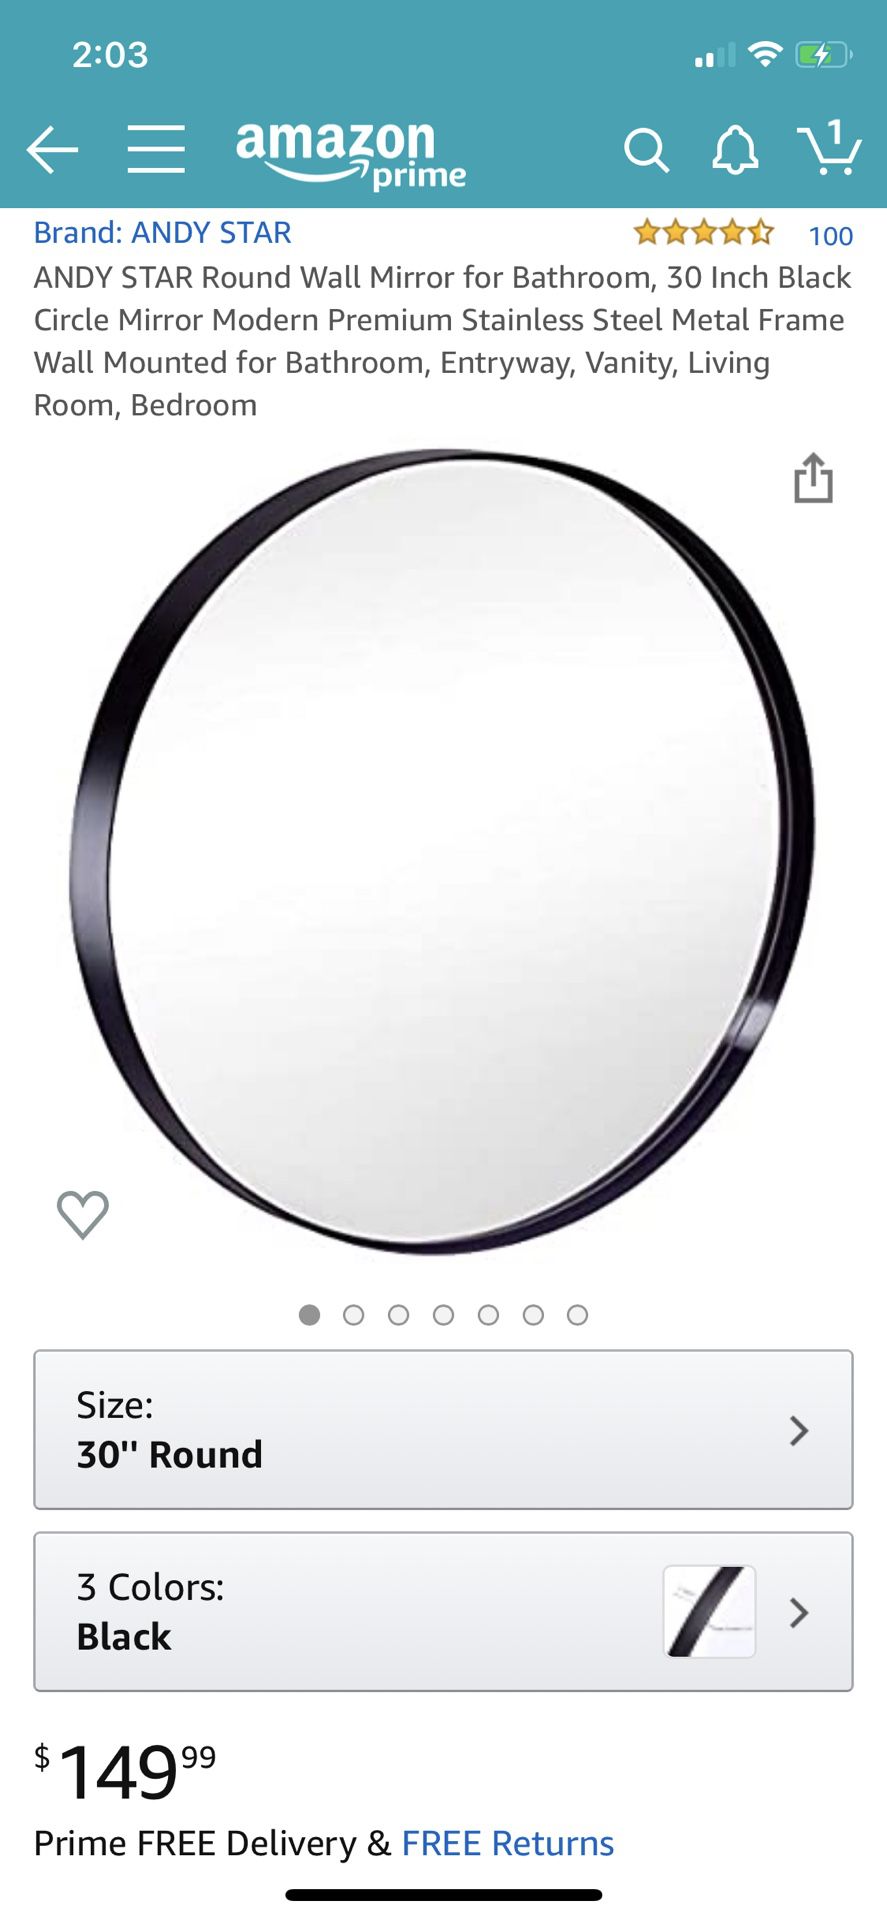 ANDY STAR Round Wall Mirror for Bathroom, 30 Inch Black Circle Mirror Modern Premium Stainless Steel Metal Frame Wall Mounted for Bathroom, Entryway,